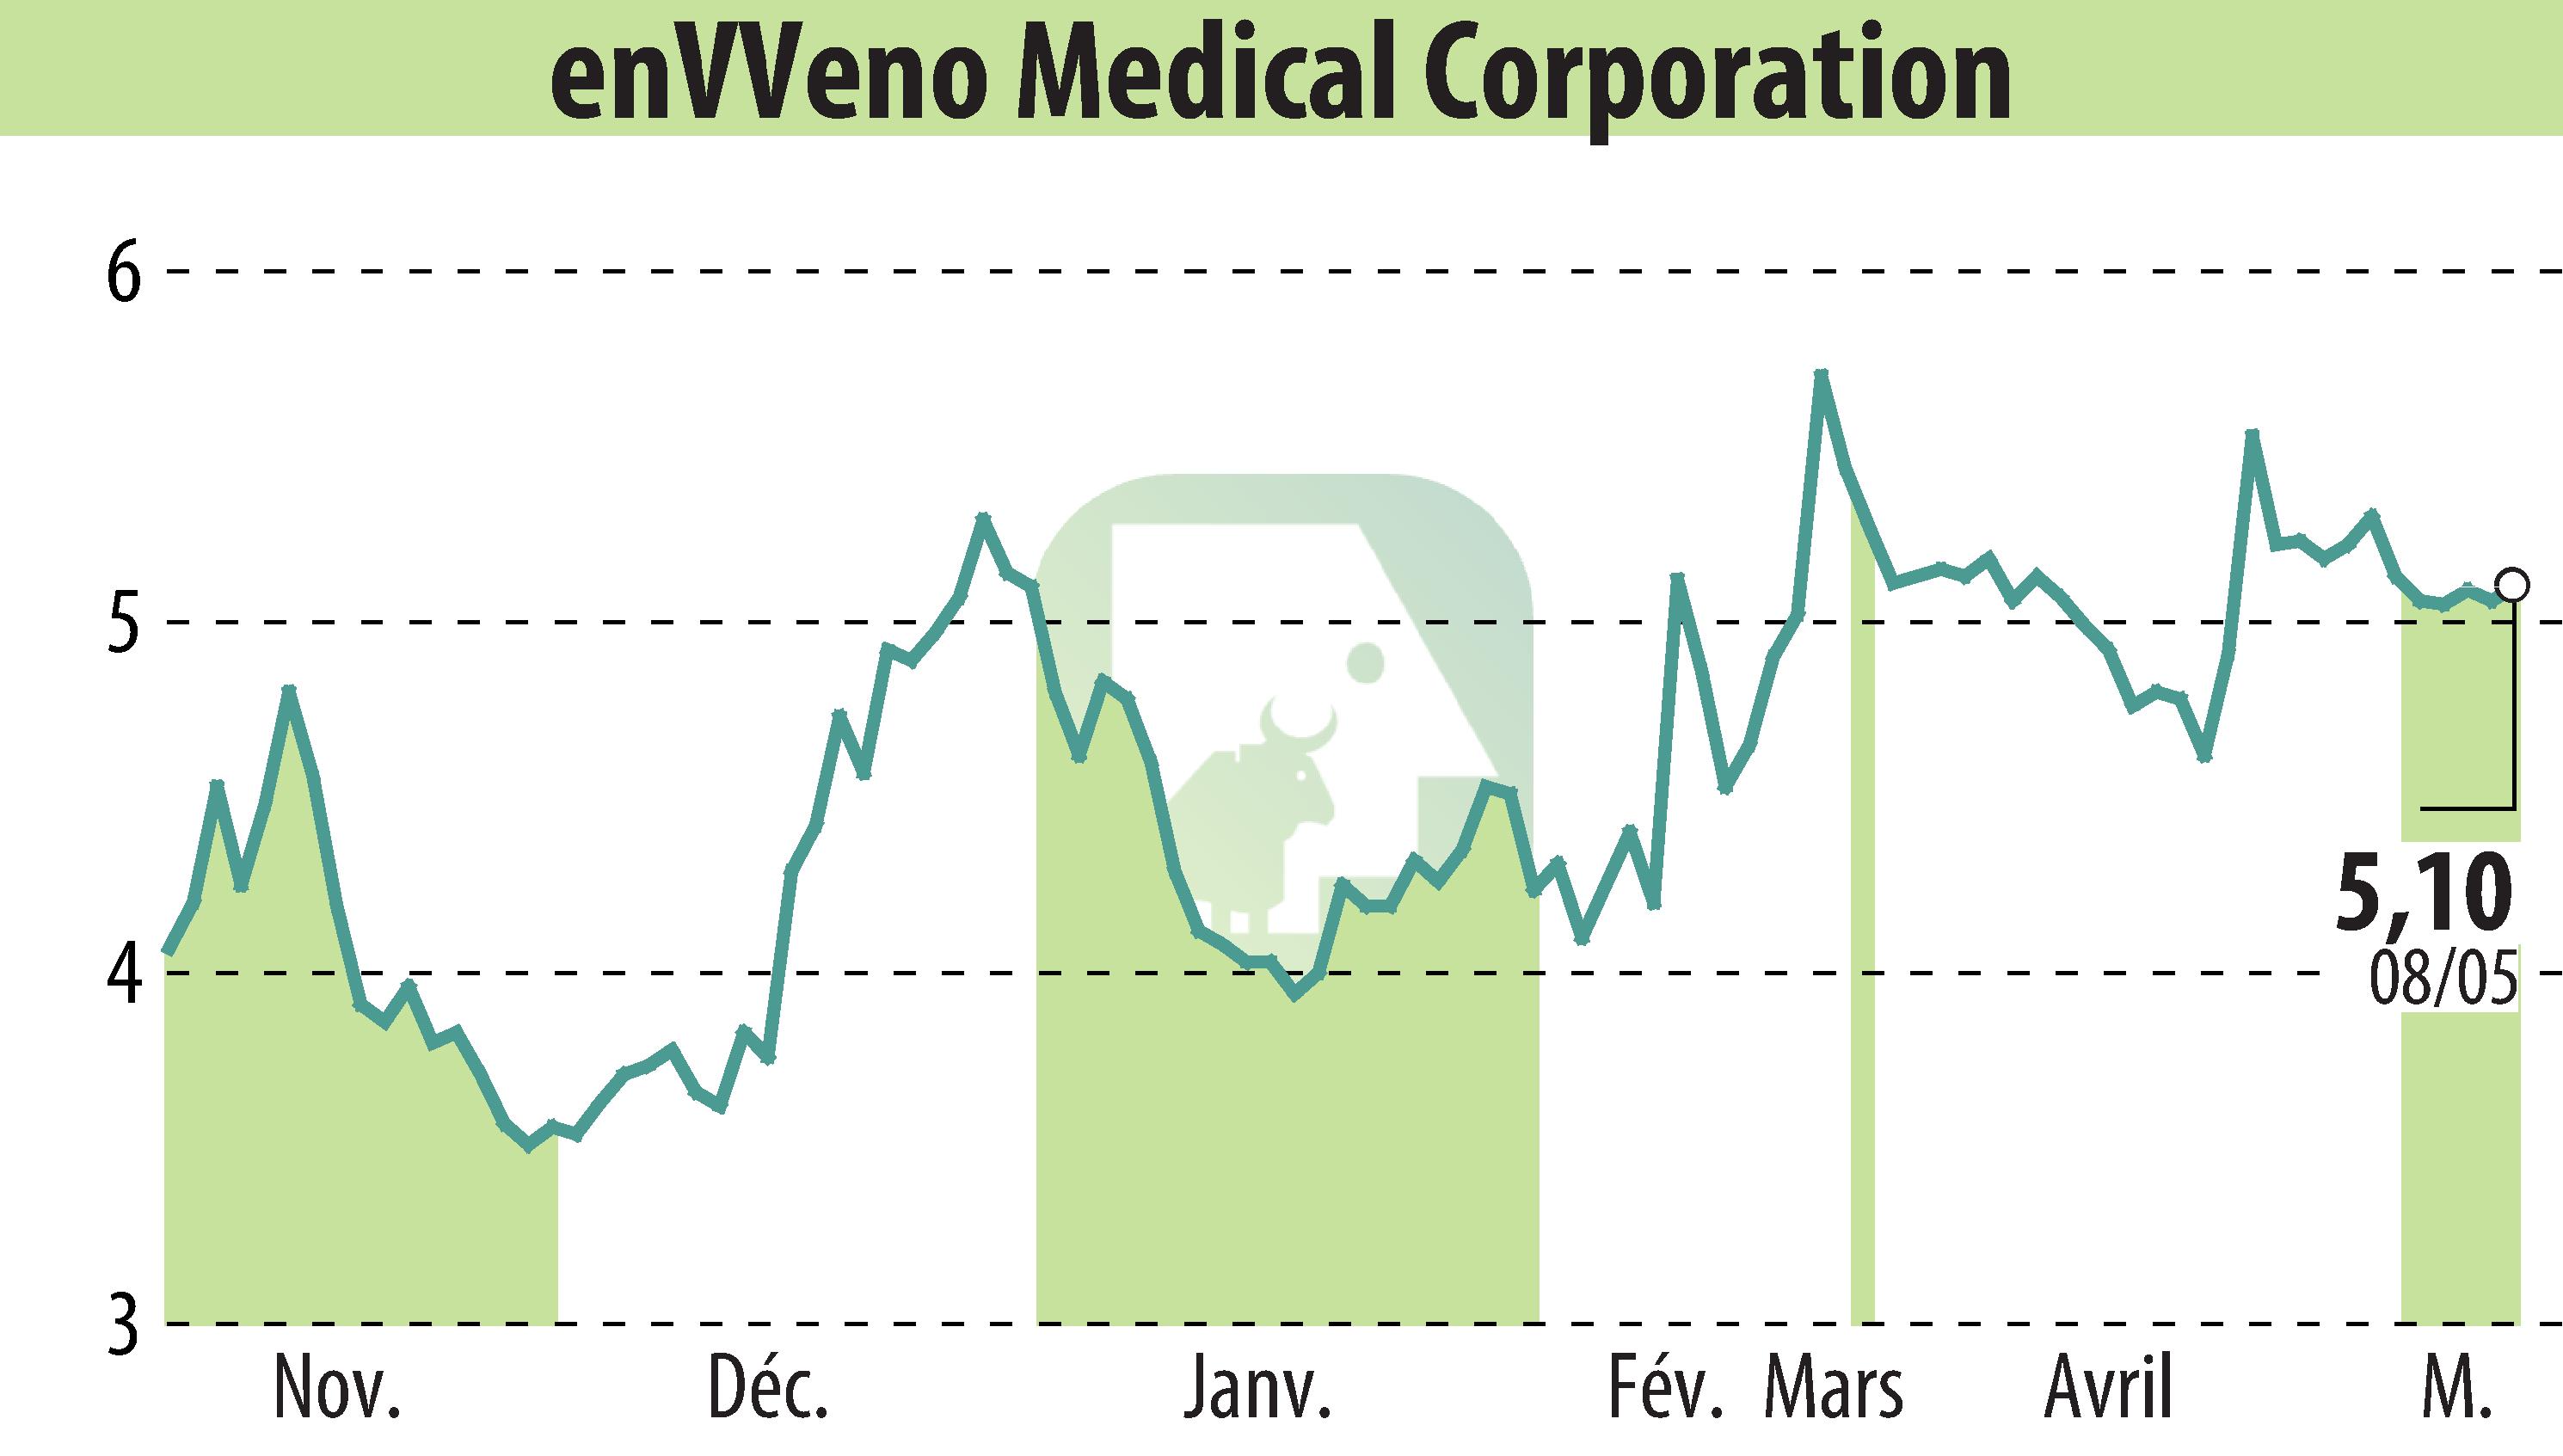 Stock price chart of EnVVeno Medical Corporation (EBR:NVNO) showing fluctuations.